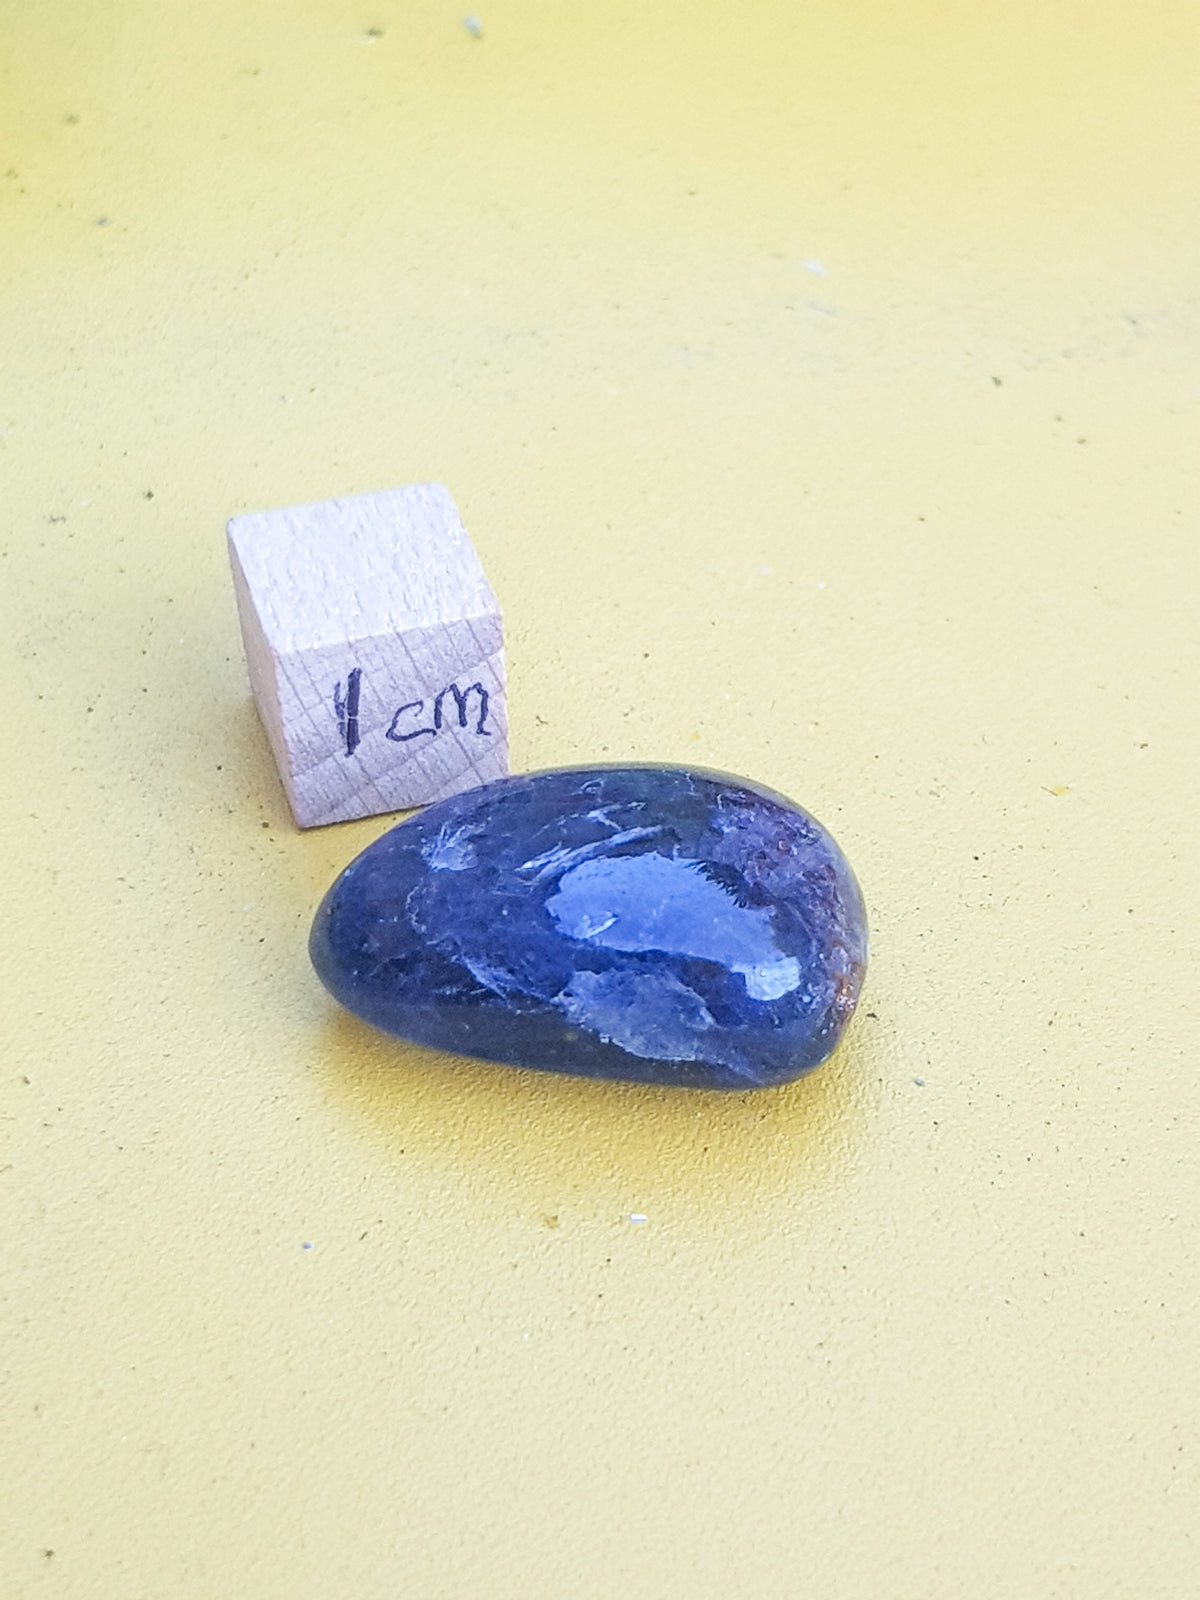 Small polished sample of Iolitye next to a 1cm cube for scale. It is approximately 2cm along its longest axis. The sample appears to be dark blue, but this is primarily an artifact of photography and is due to contrast correction. on the camera. The true shade is a little lighter.